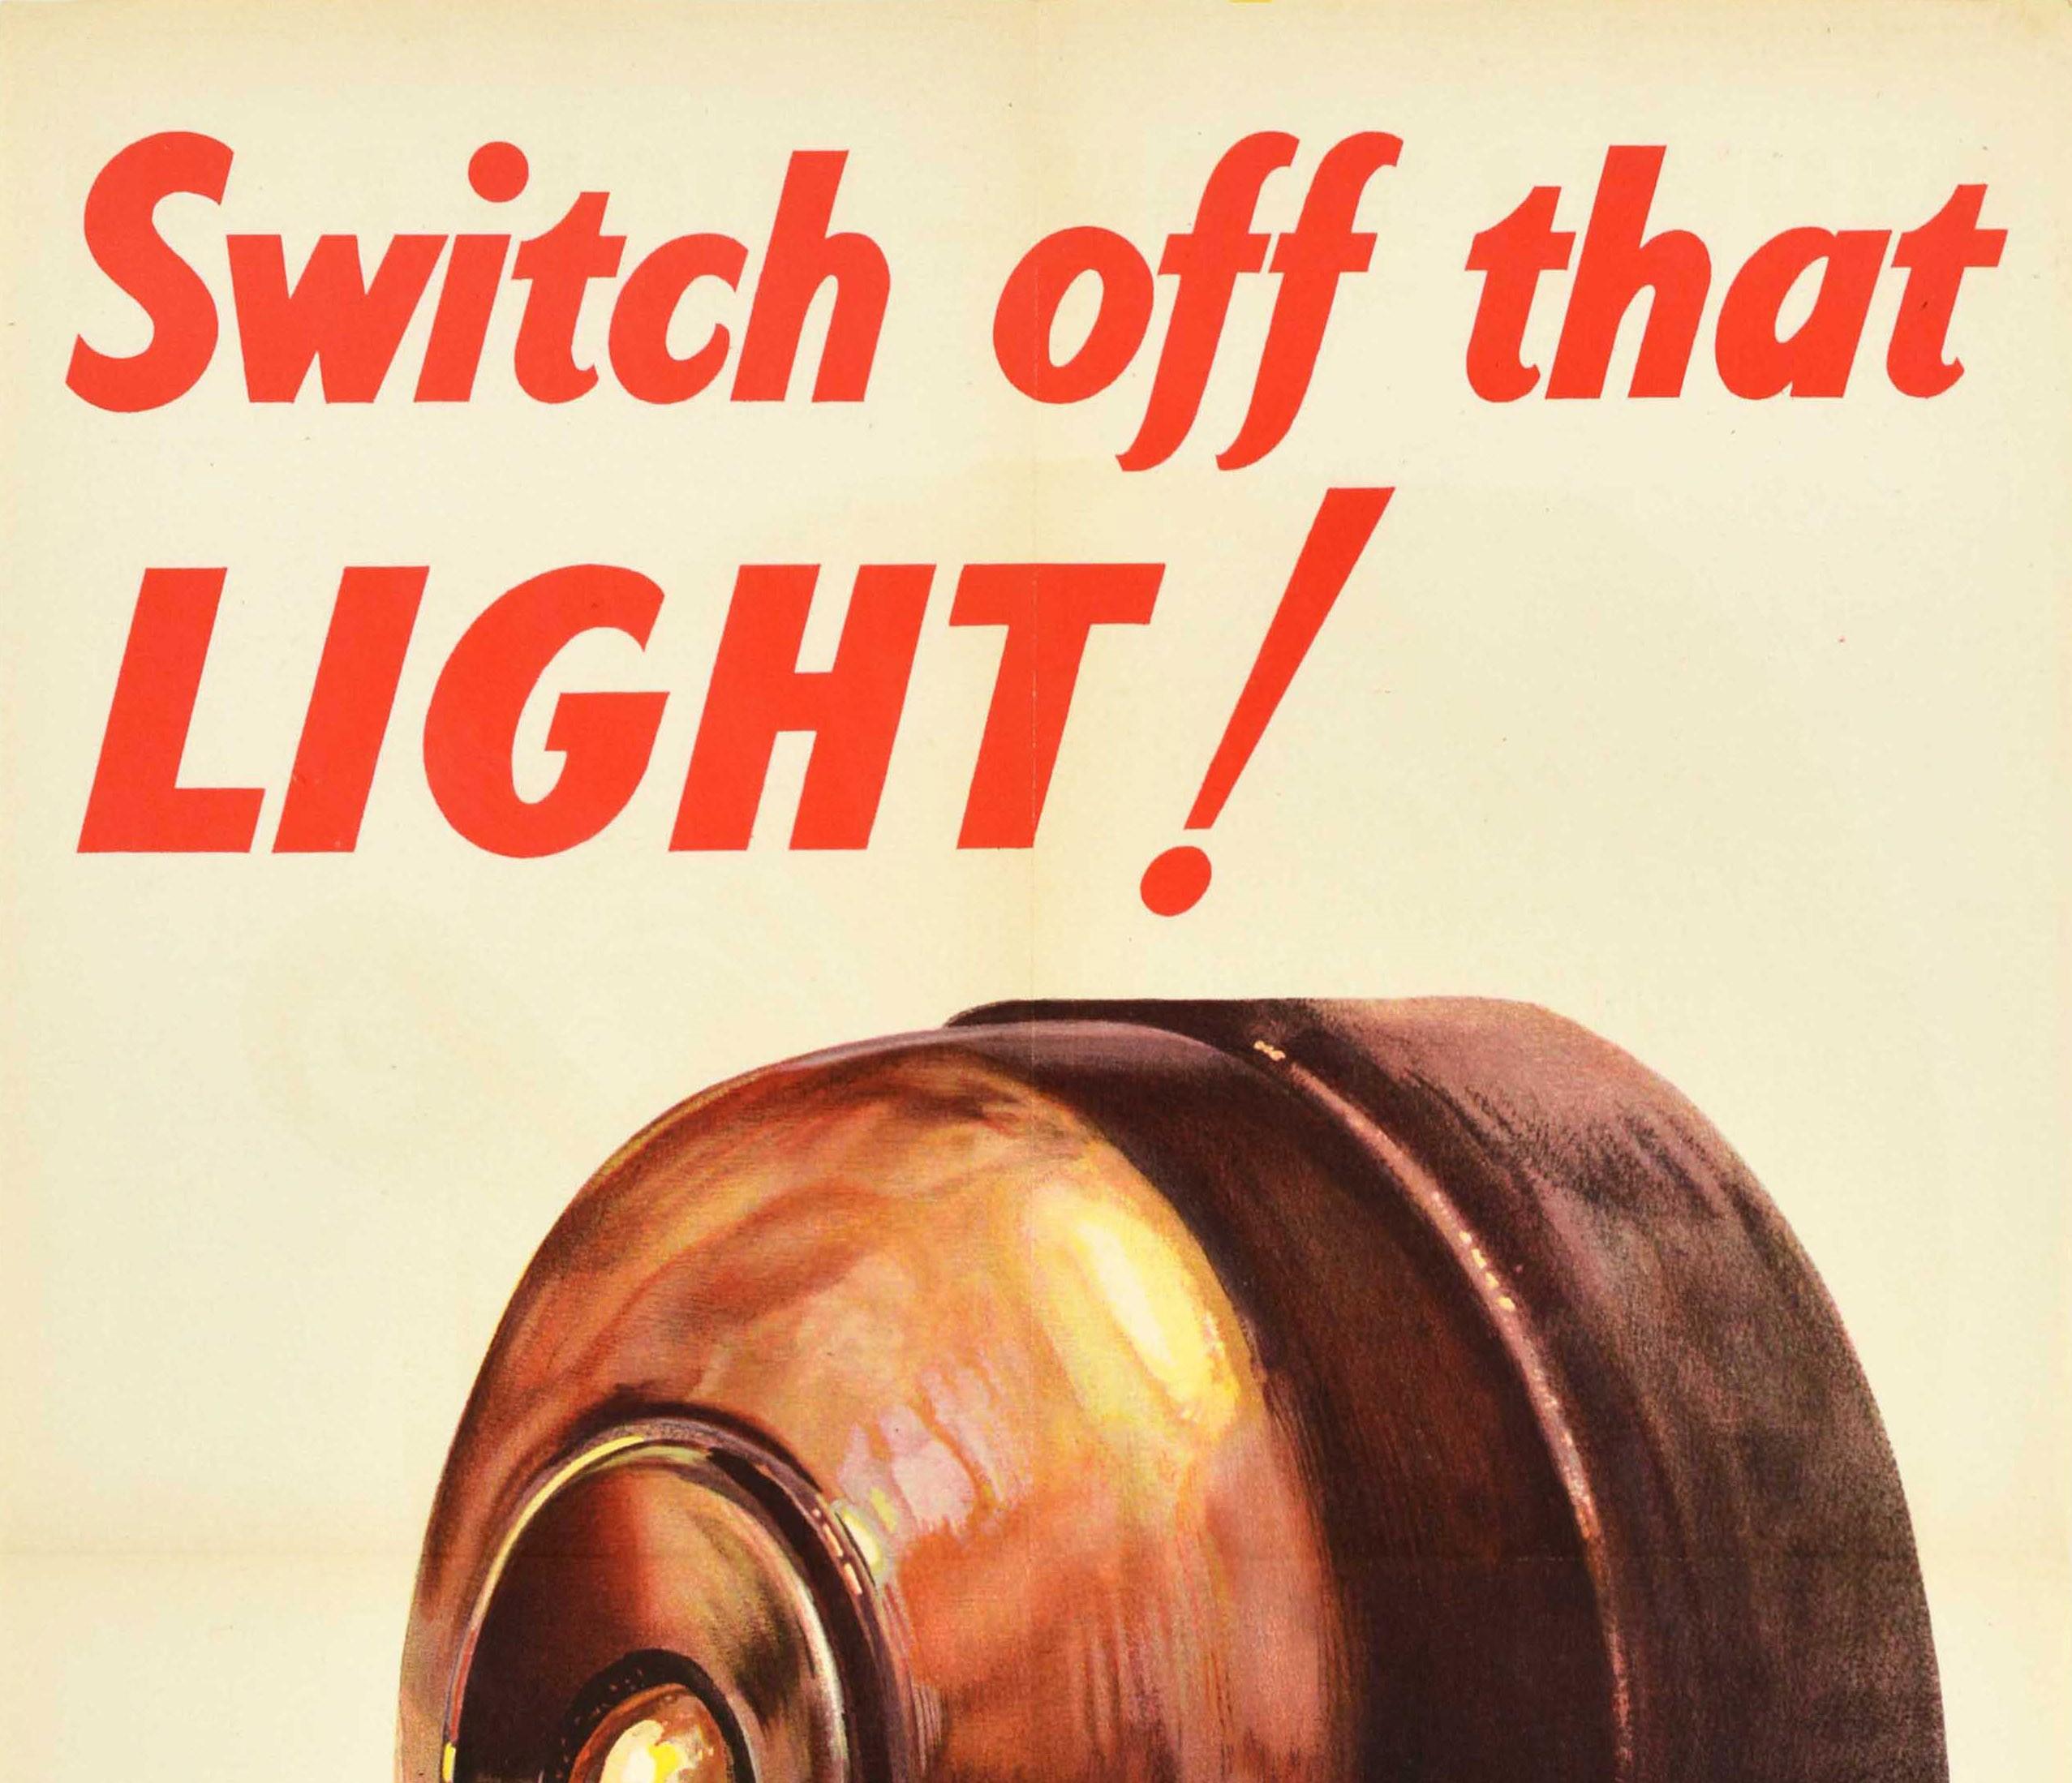 Rare original vintage World War Two propaganda poster to encourage electricity energy saving - Switch off that light! Less light More planes - featuring an illustration of a light switch with the bold text above and below. Printed for H.M.